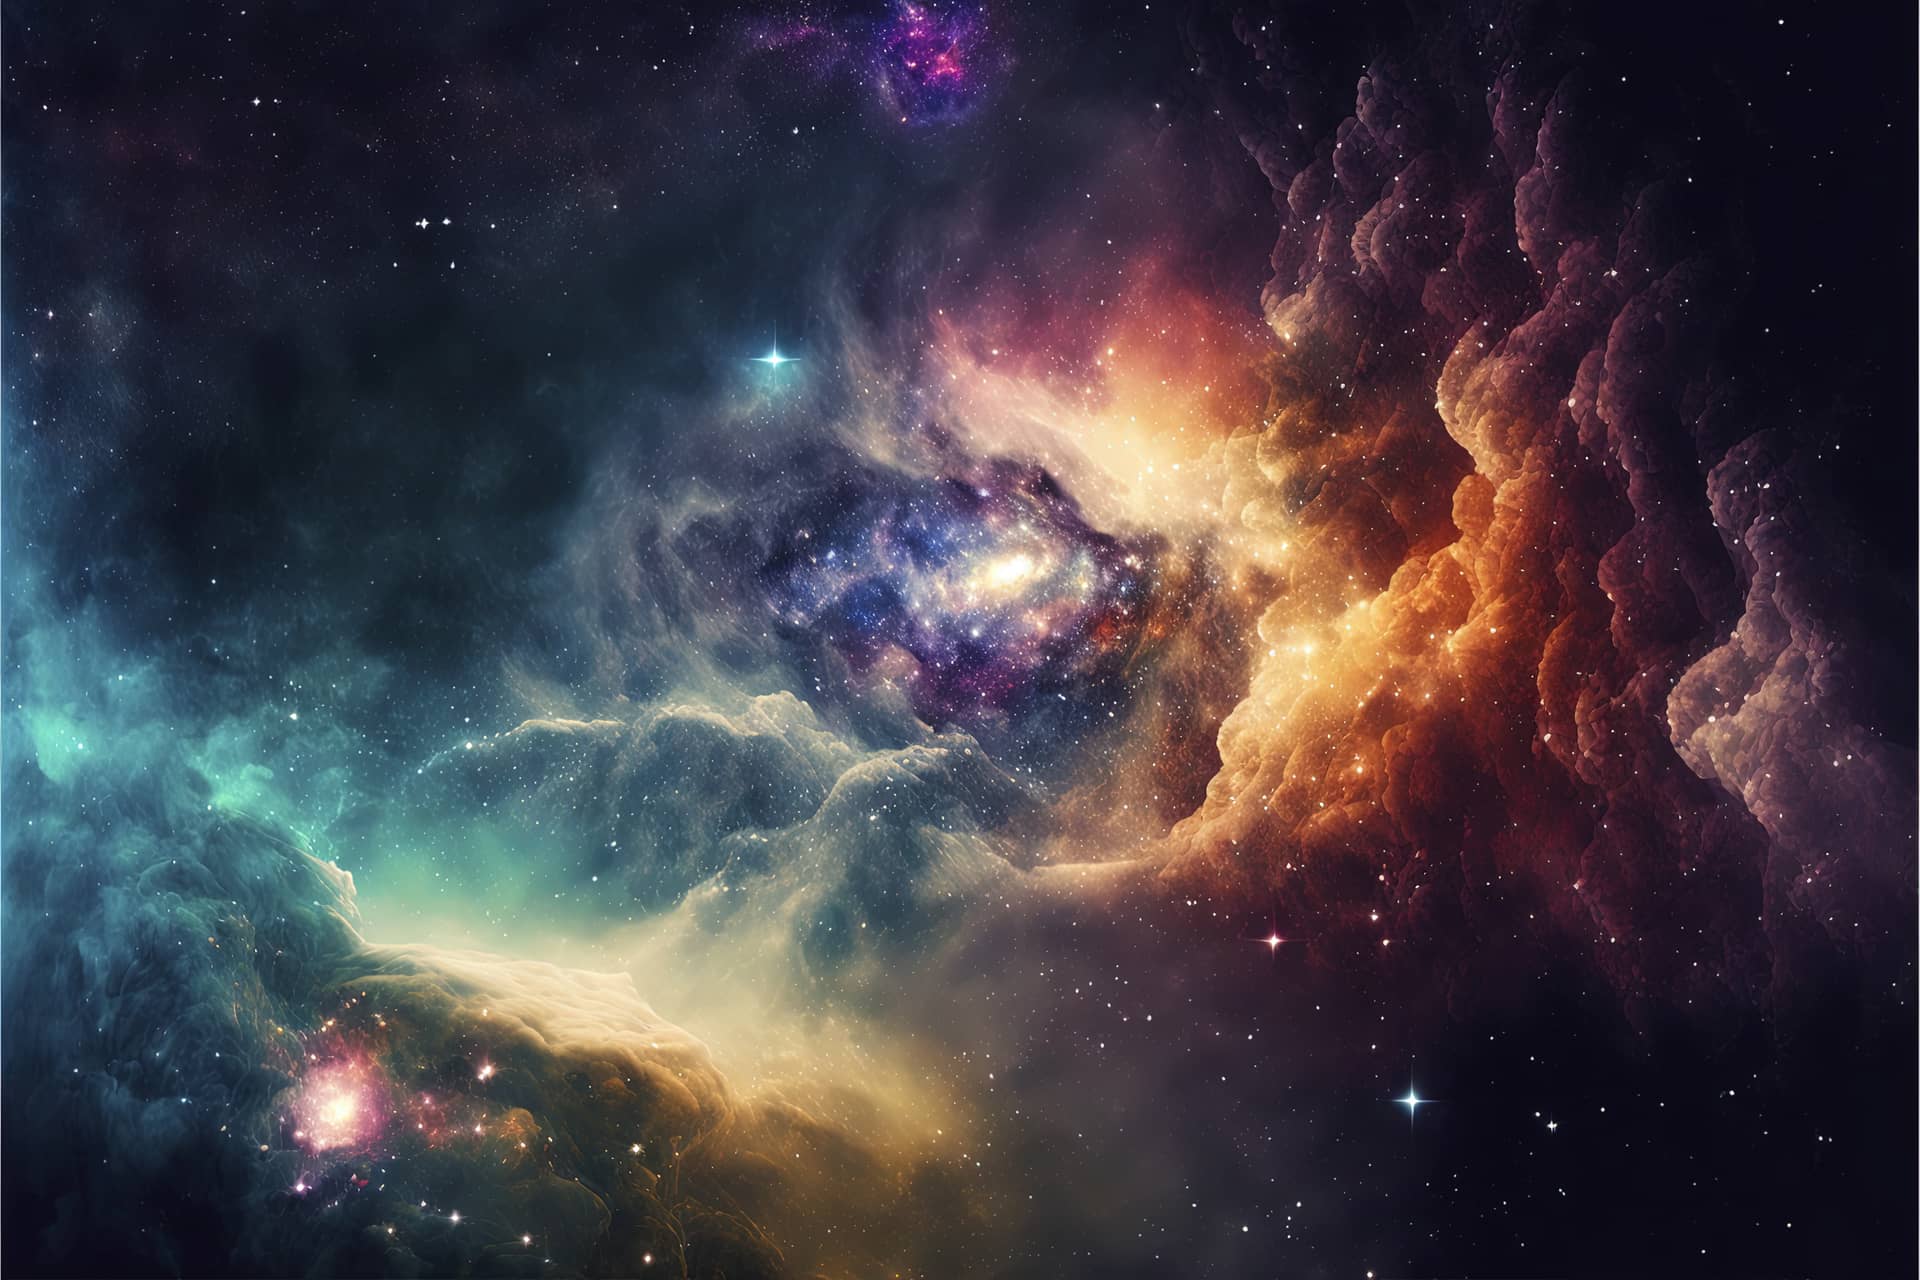 Night sky space nebula galaxies space astronomy concept background picture